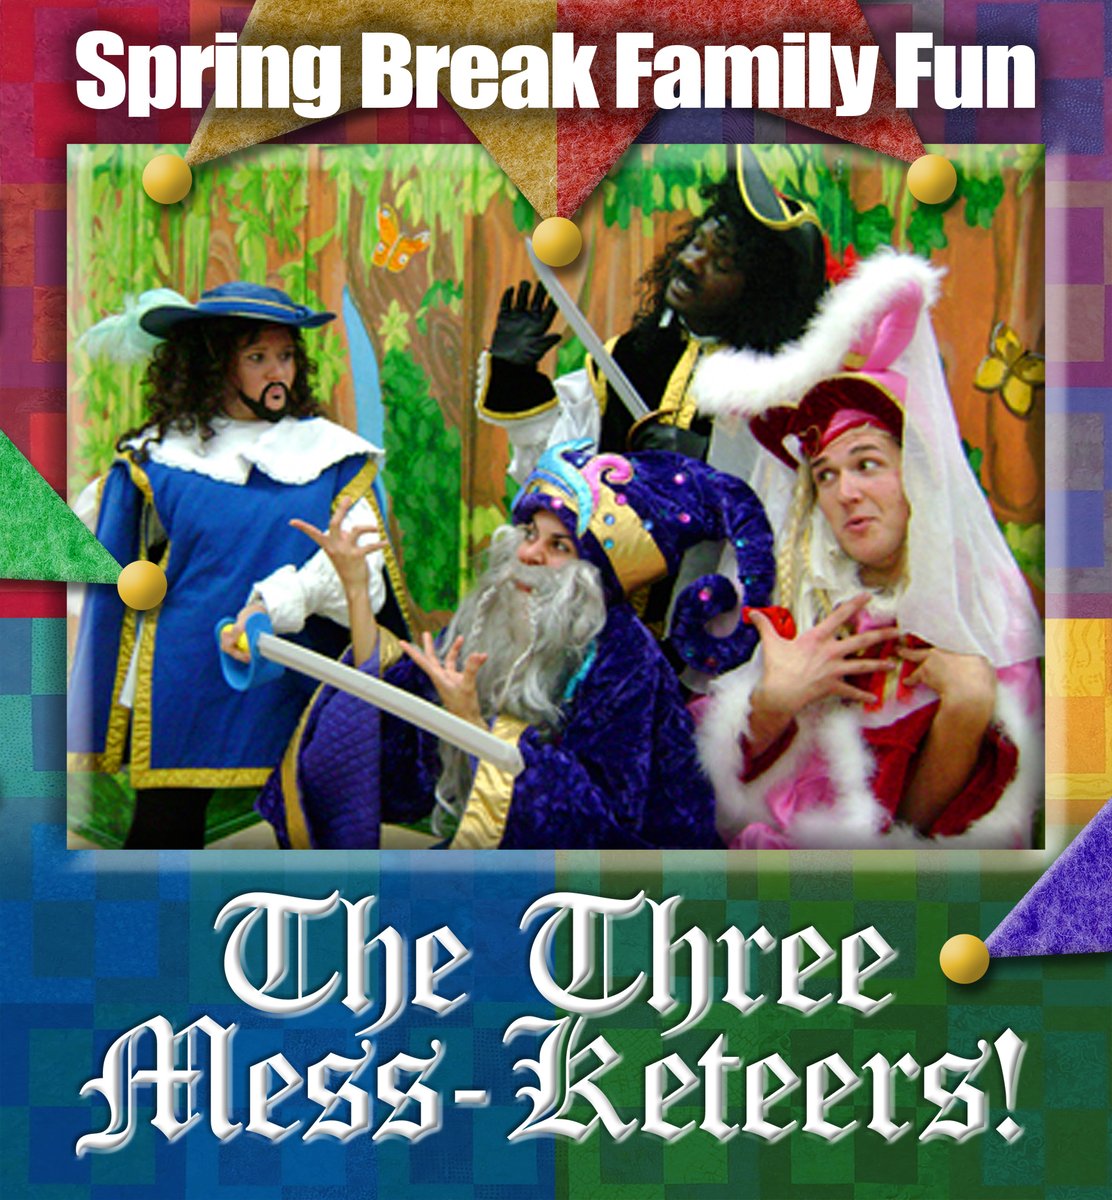 Join us Tomorrow Morning for some Spring Break Family Fun with The Three Mess-keteers! Tickets are available for purchase at: lyrictheatre.com/show/11115-the…